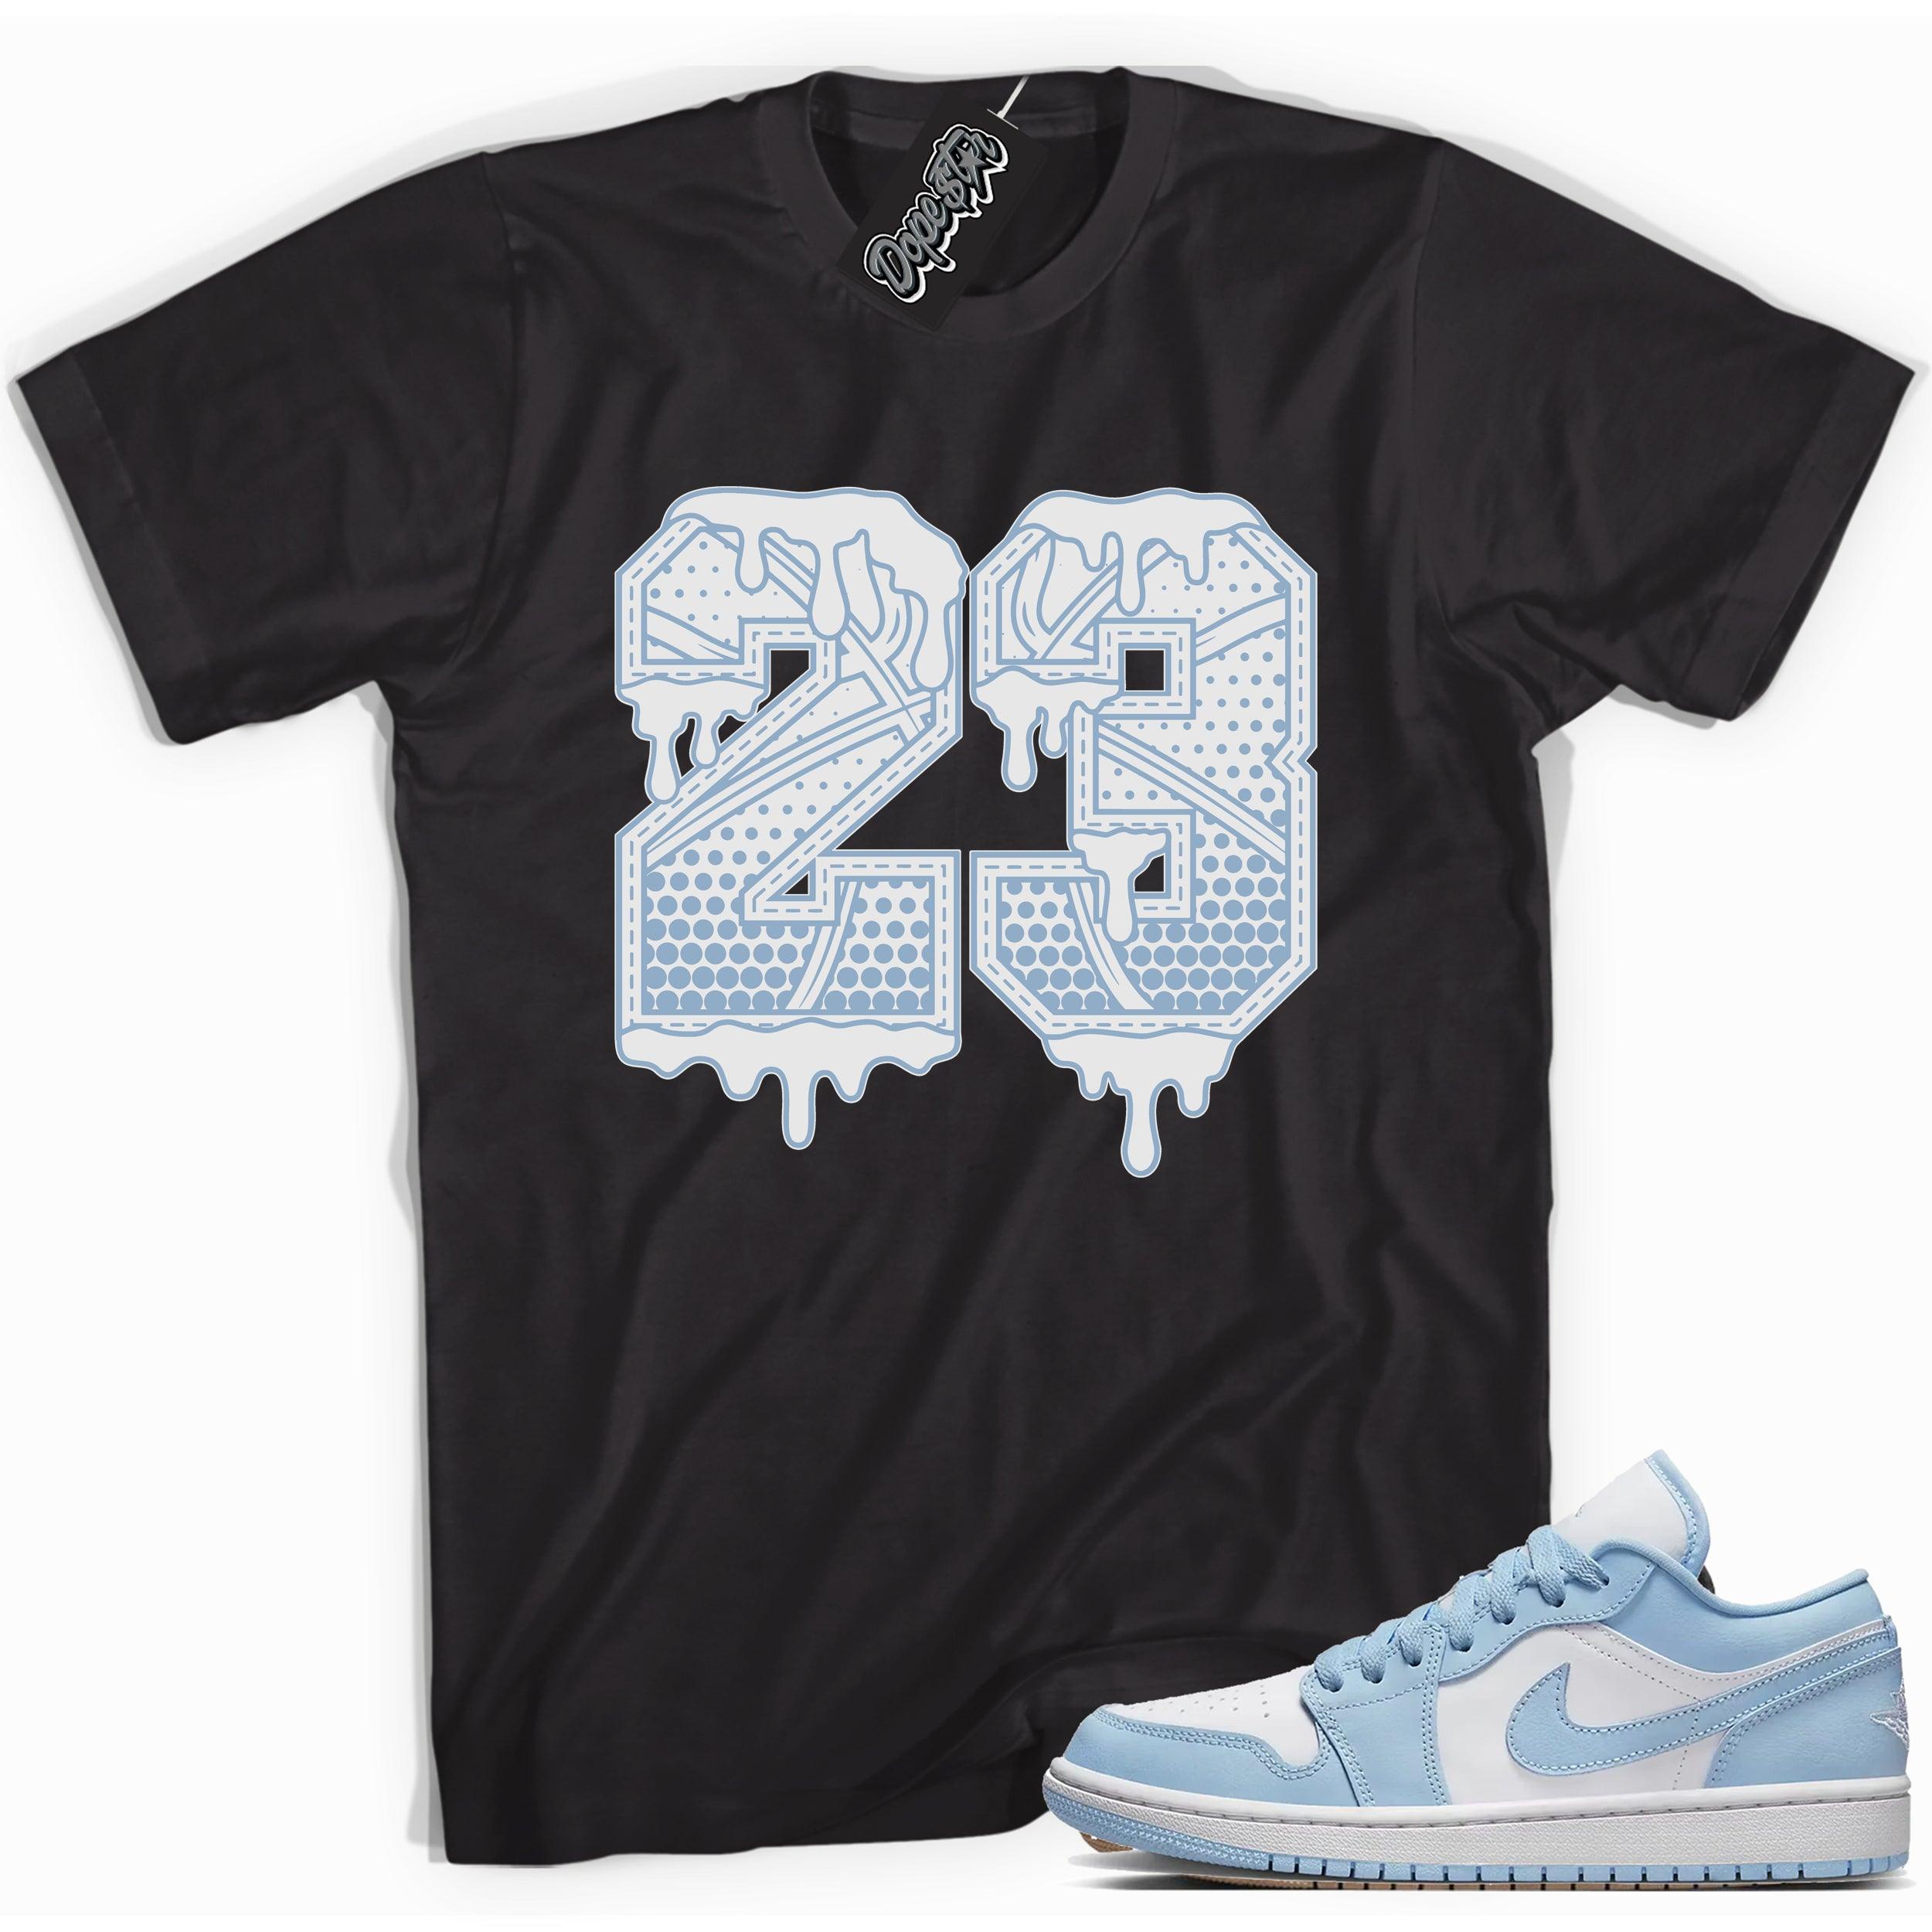 Cool Black tee With "23 Ball" that perfectly matches Air Jordan 1 Low Aluminum Sneakers